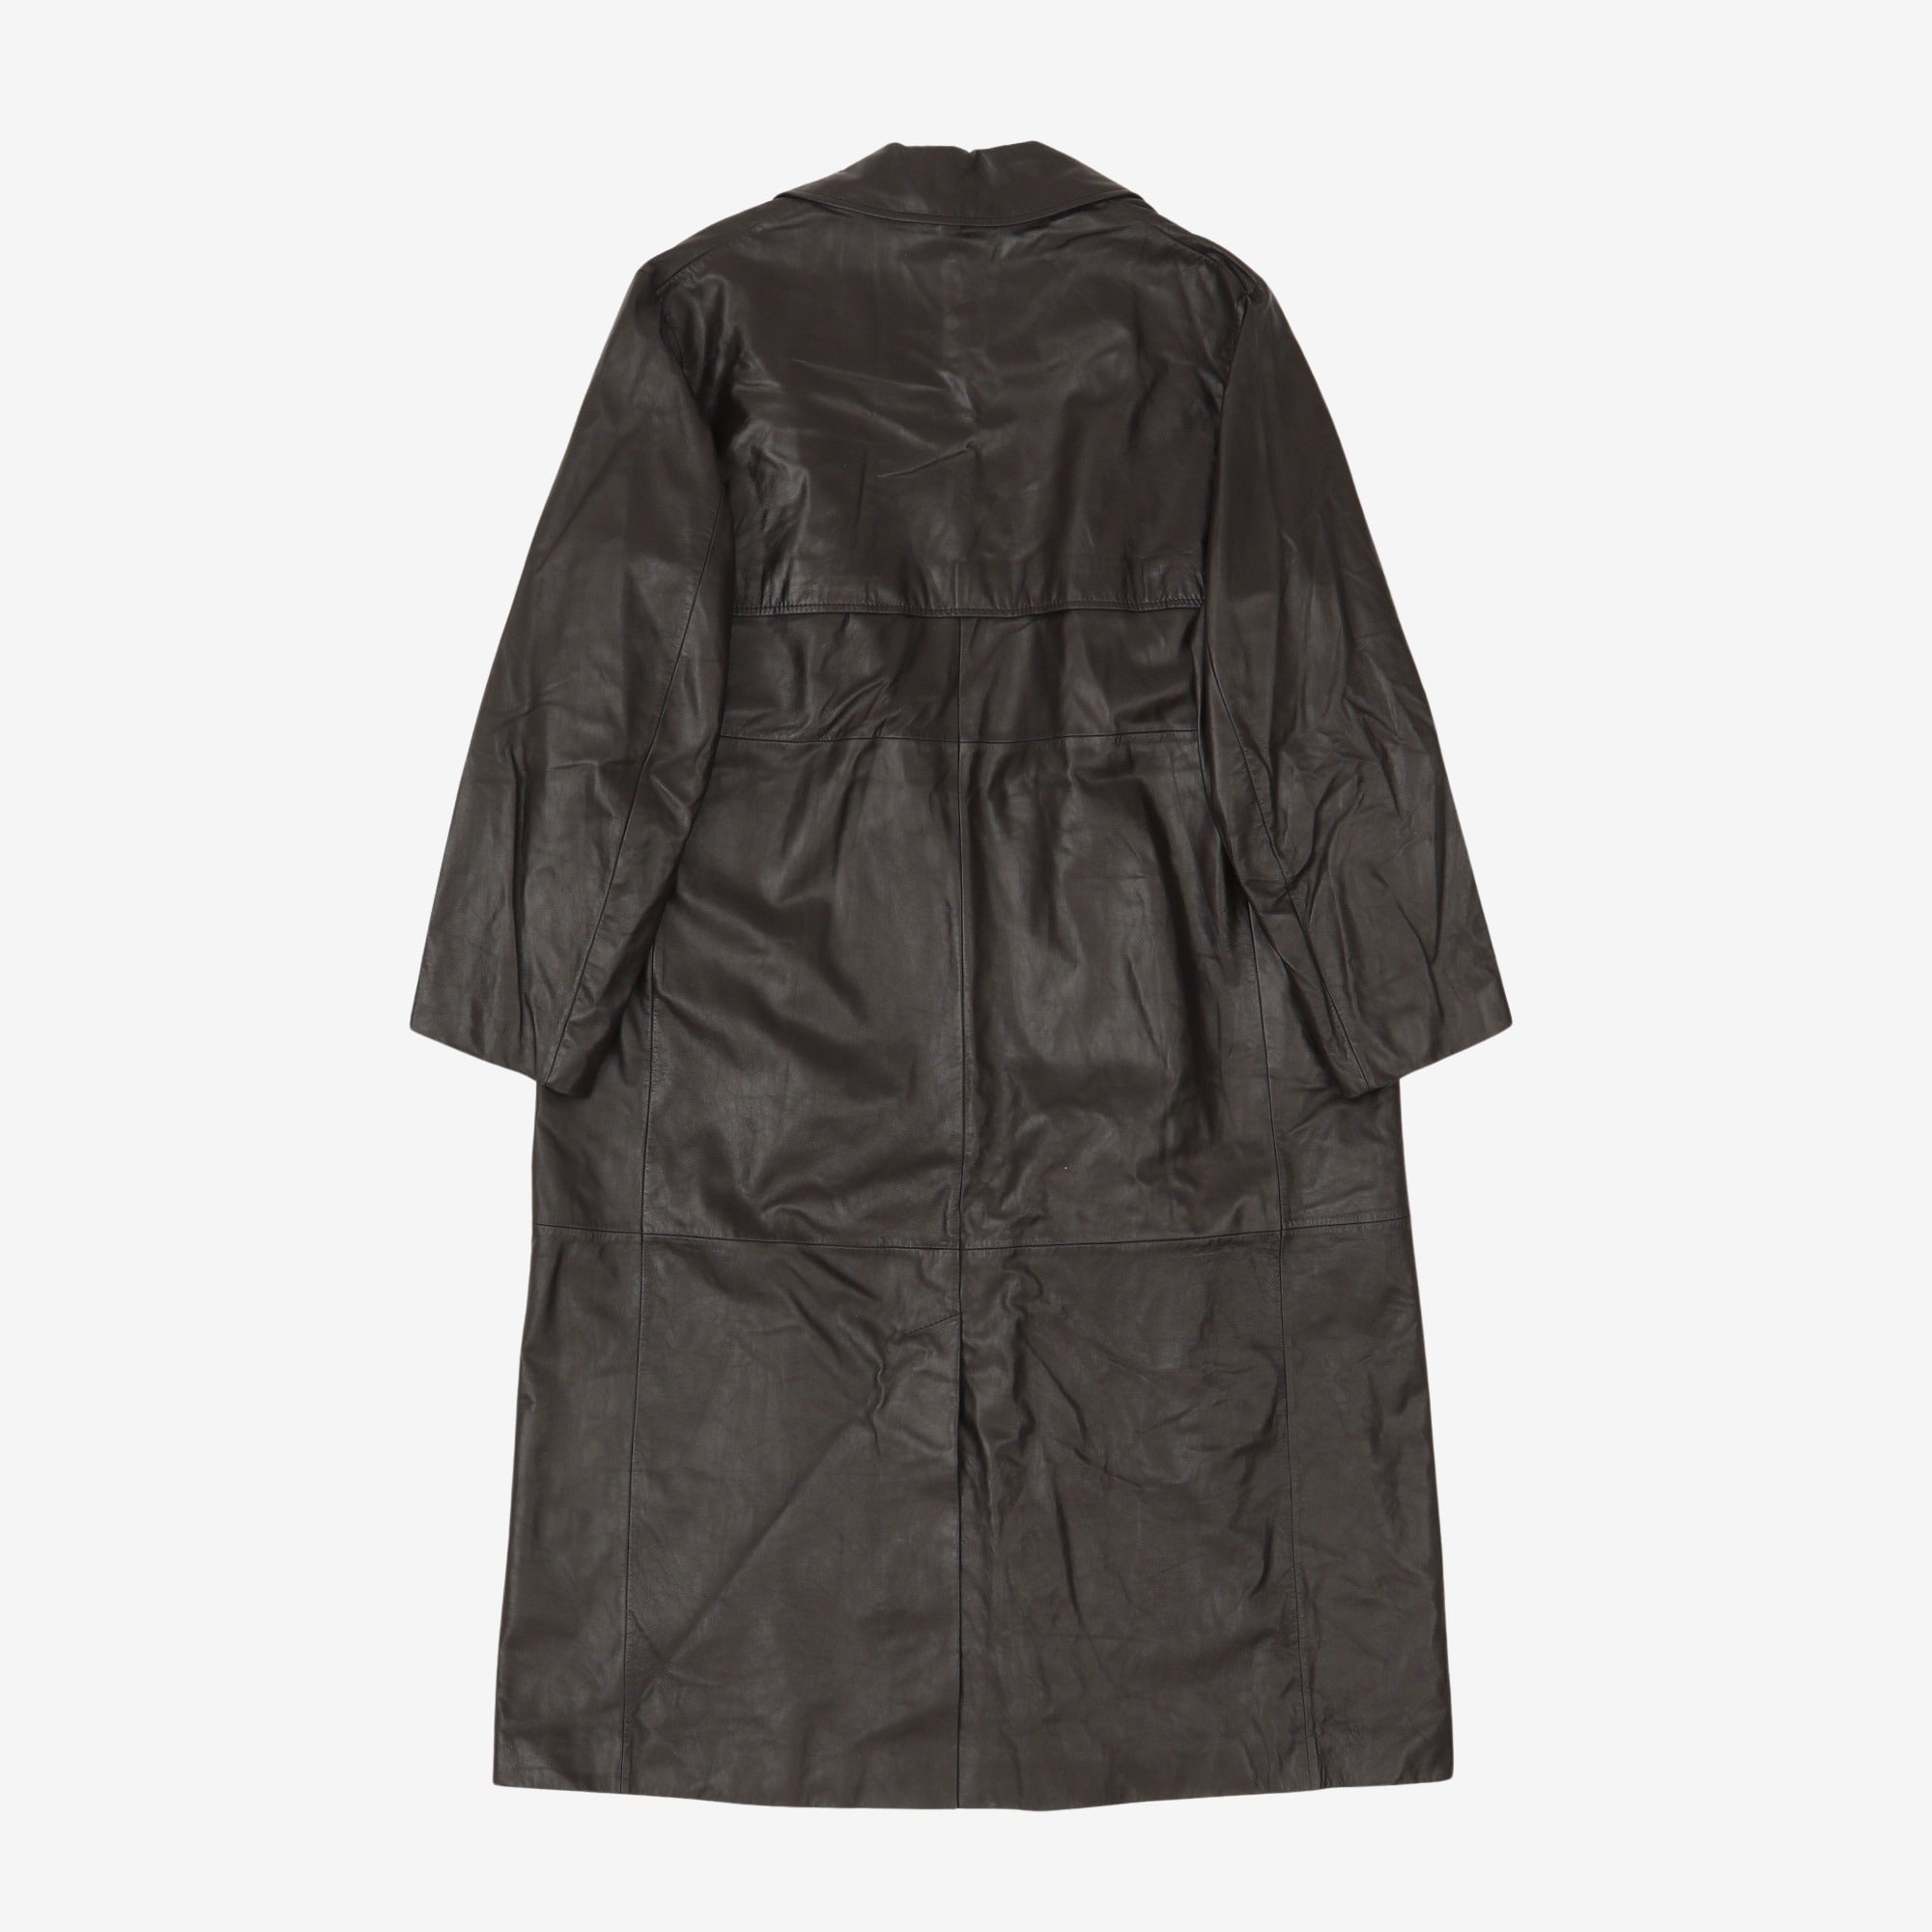 Leather Trench Coat (Sample)